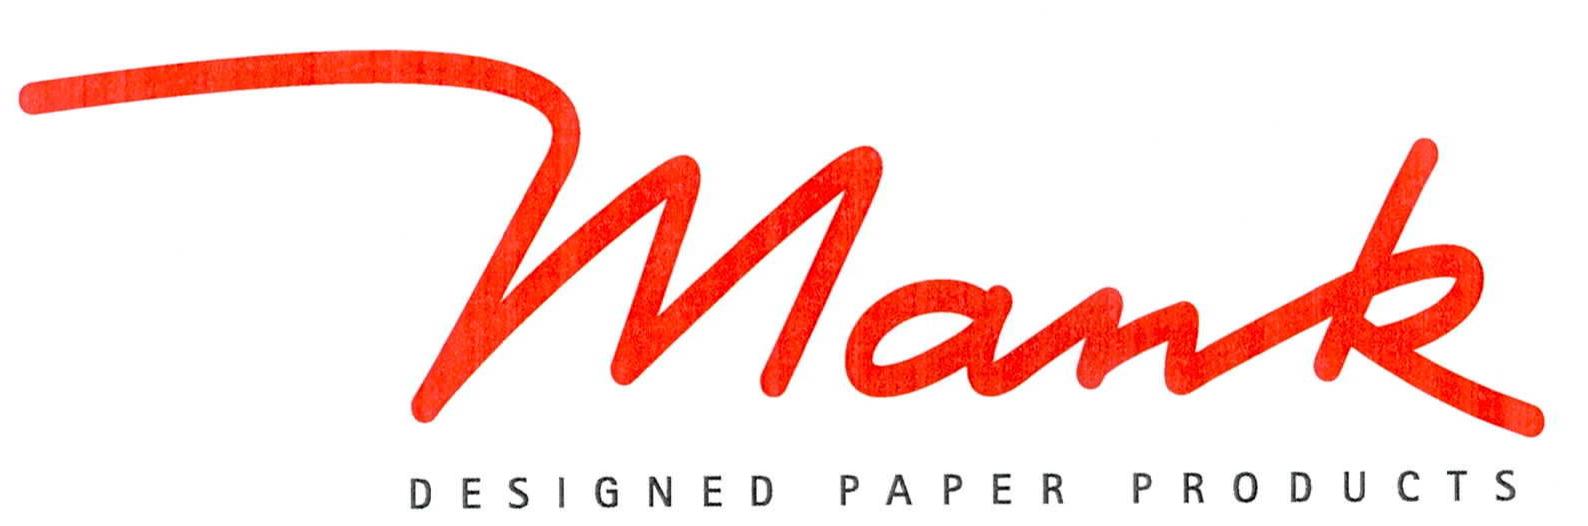  MANK DESIGNED PAPER PRODUCTS